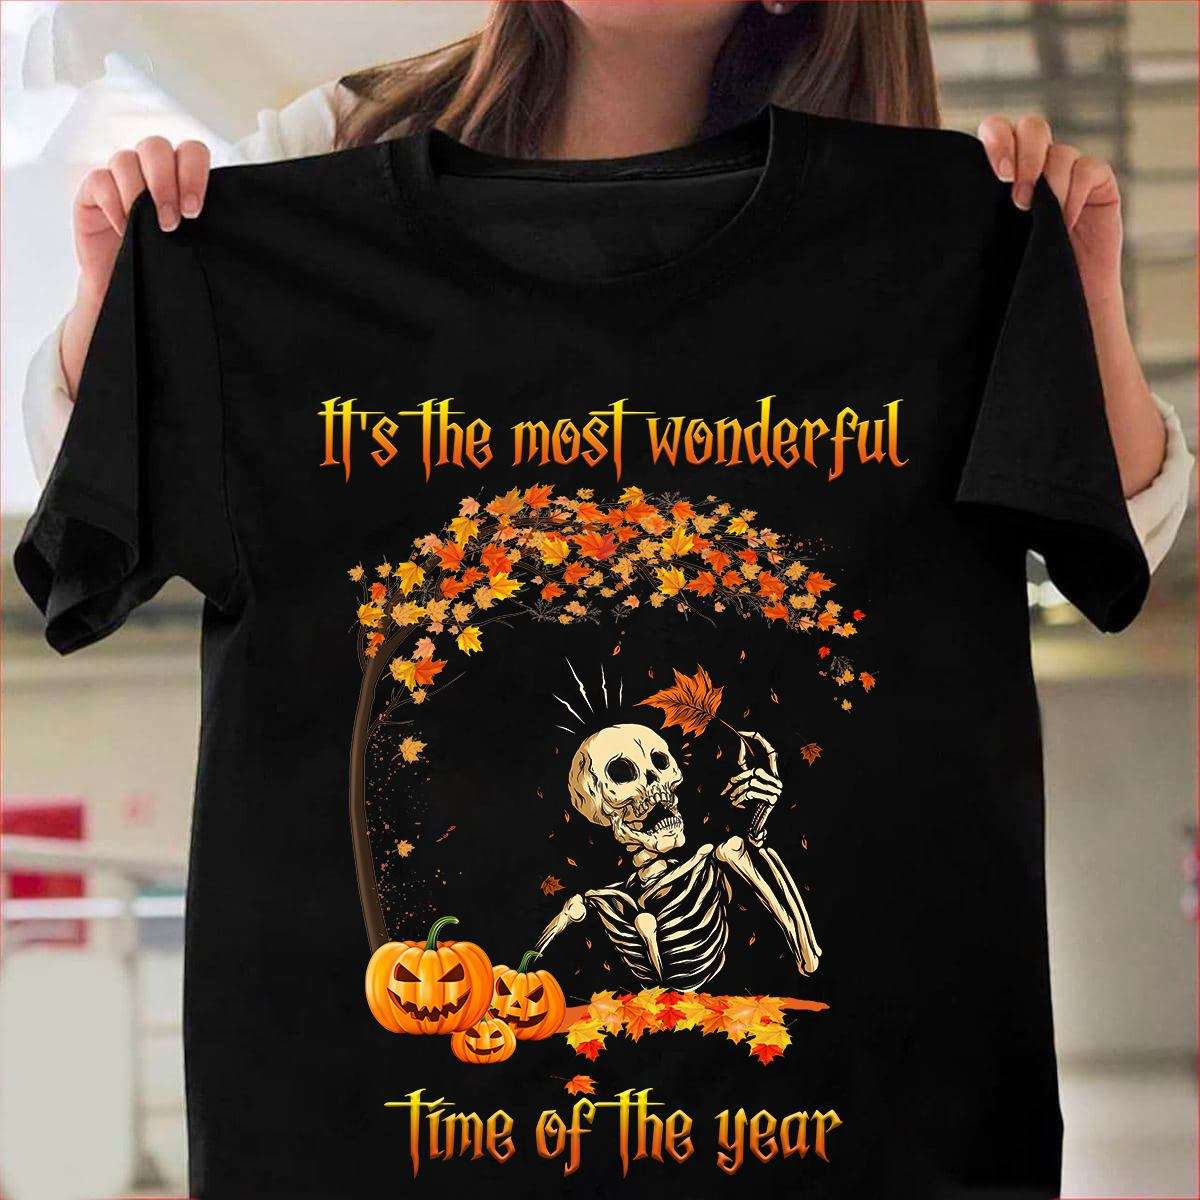 It's the most wonderful time of the year - Skull and devil pumpkin, Halloween wonderful time